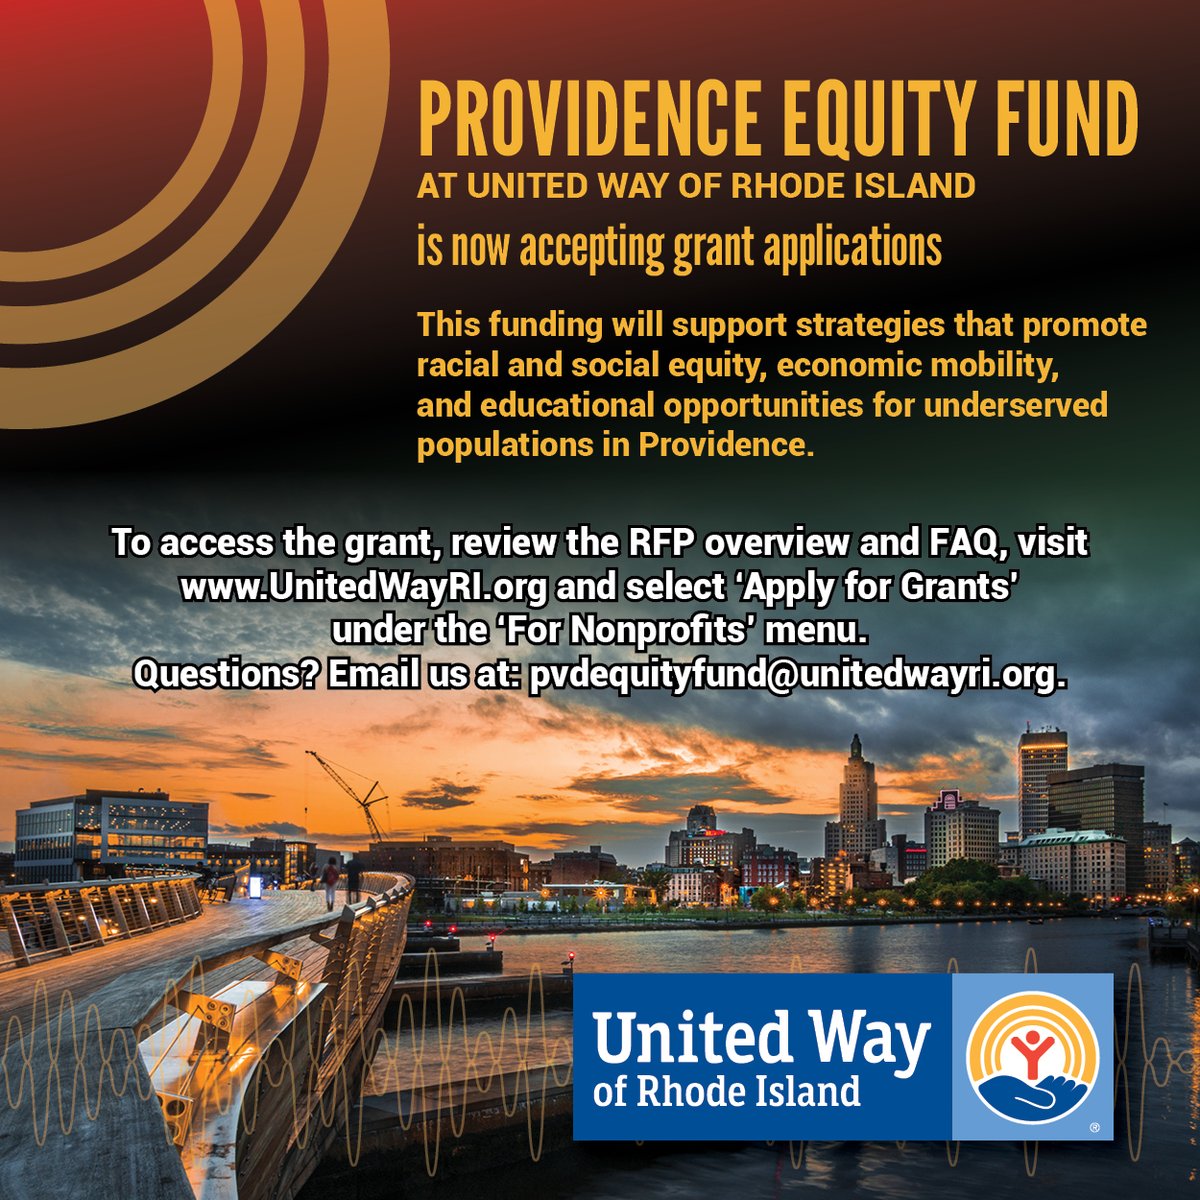 We are proud to launch the #Providence Equity Fund at @liveunitedri in collaboration with @CityofProv. We're awarding up to $1.5 million over two years to support nonprofits working toward racial & social #equity, economic mobility, and educational opportunities in Providence. 🧵